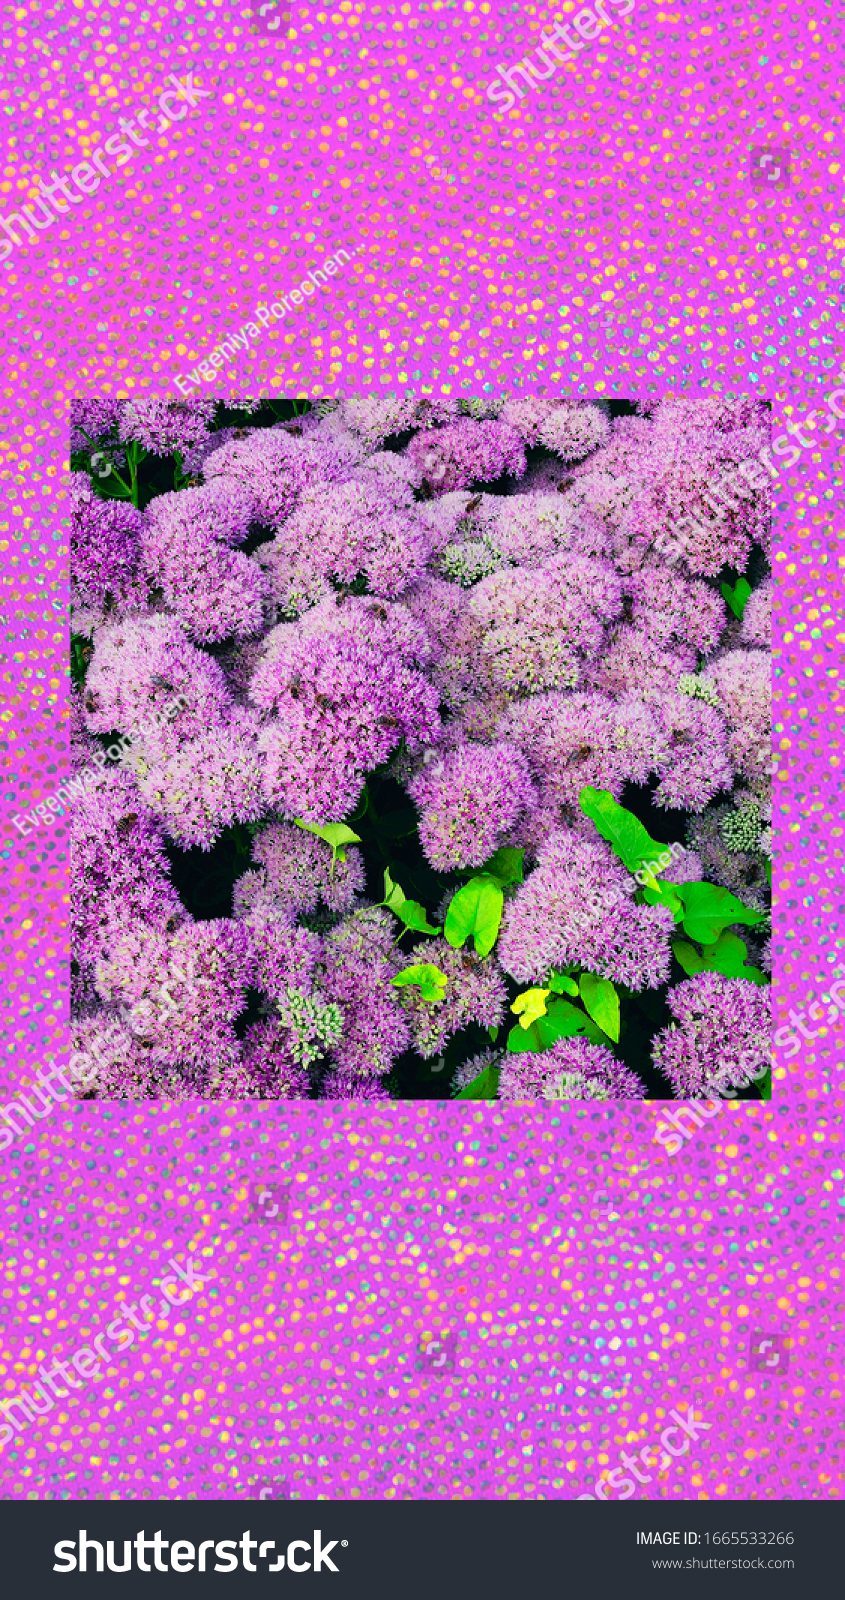 Fashion Aesthetic Wallpaper Phone Violet Flowers Nature Stock Image 1665533266